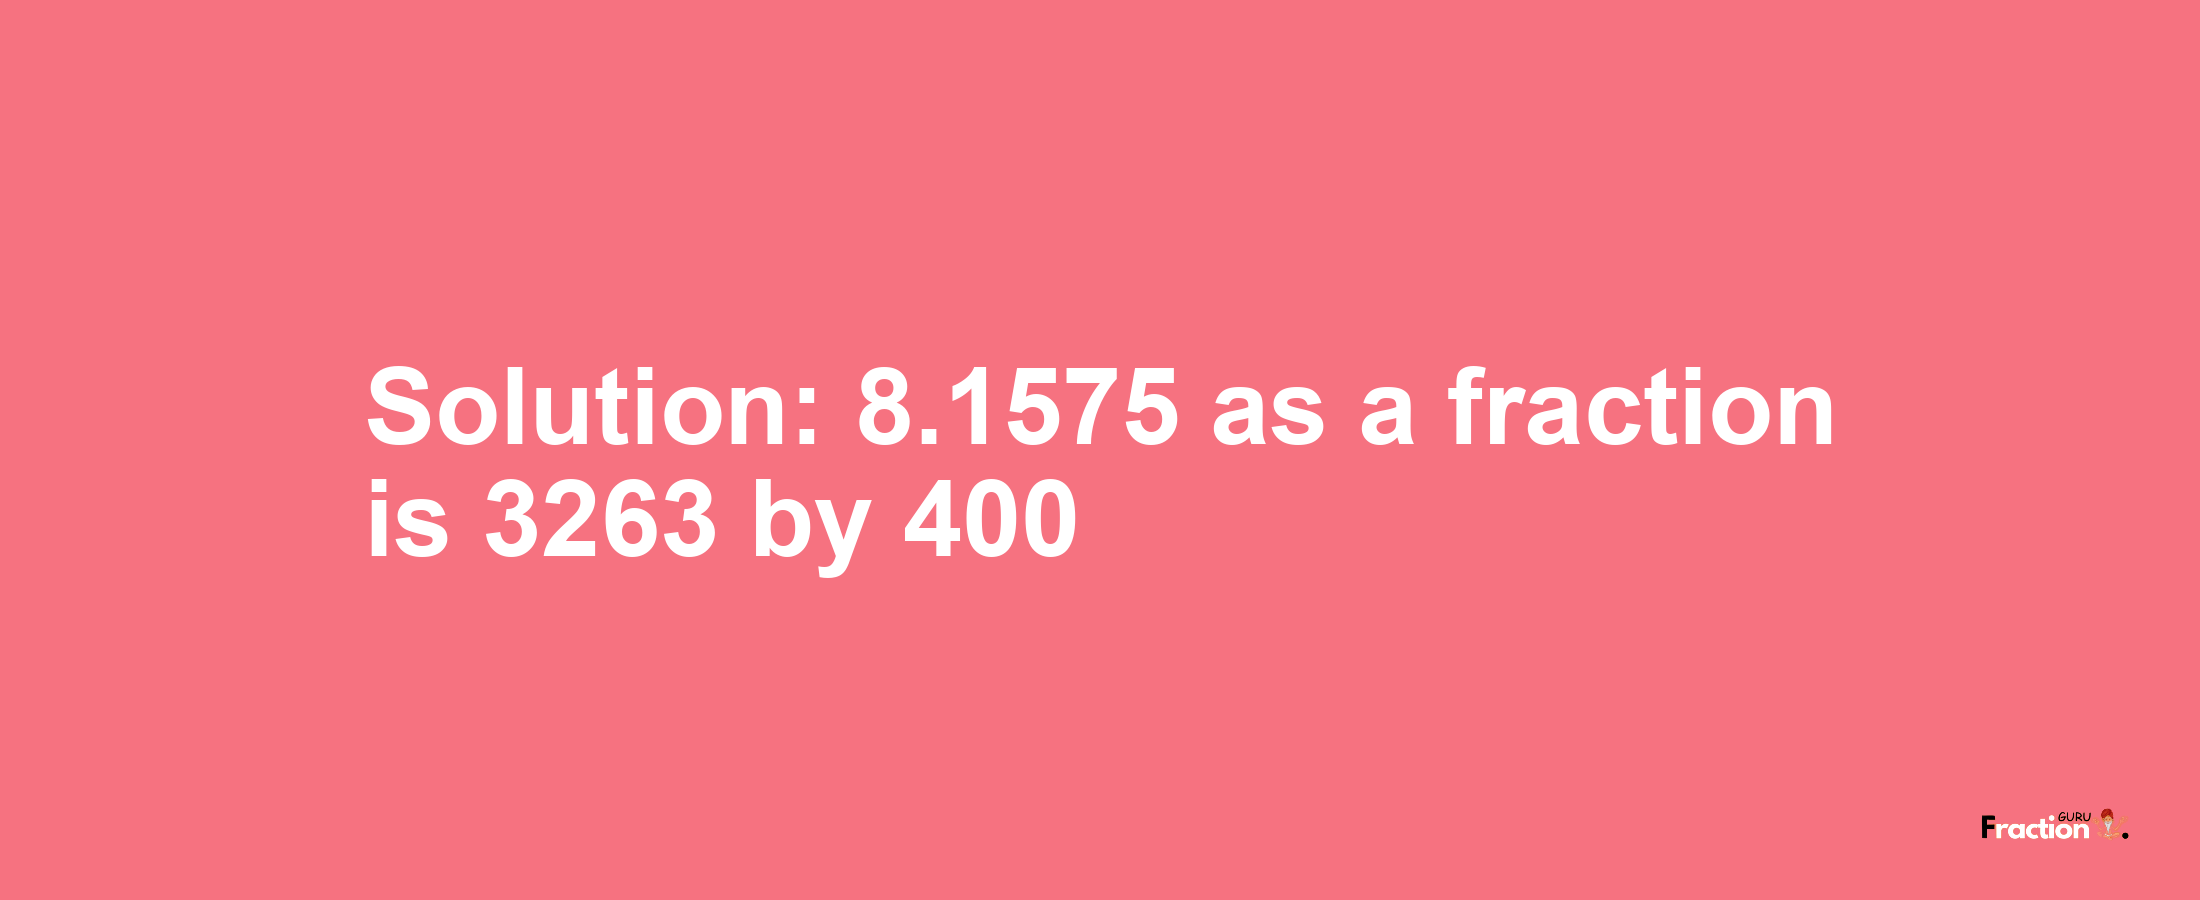 Solution:8.1575 as a fraction is 3263/400